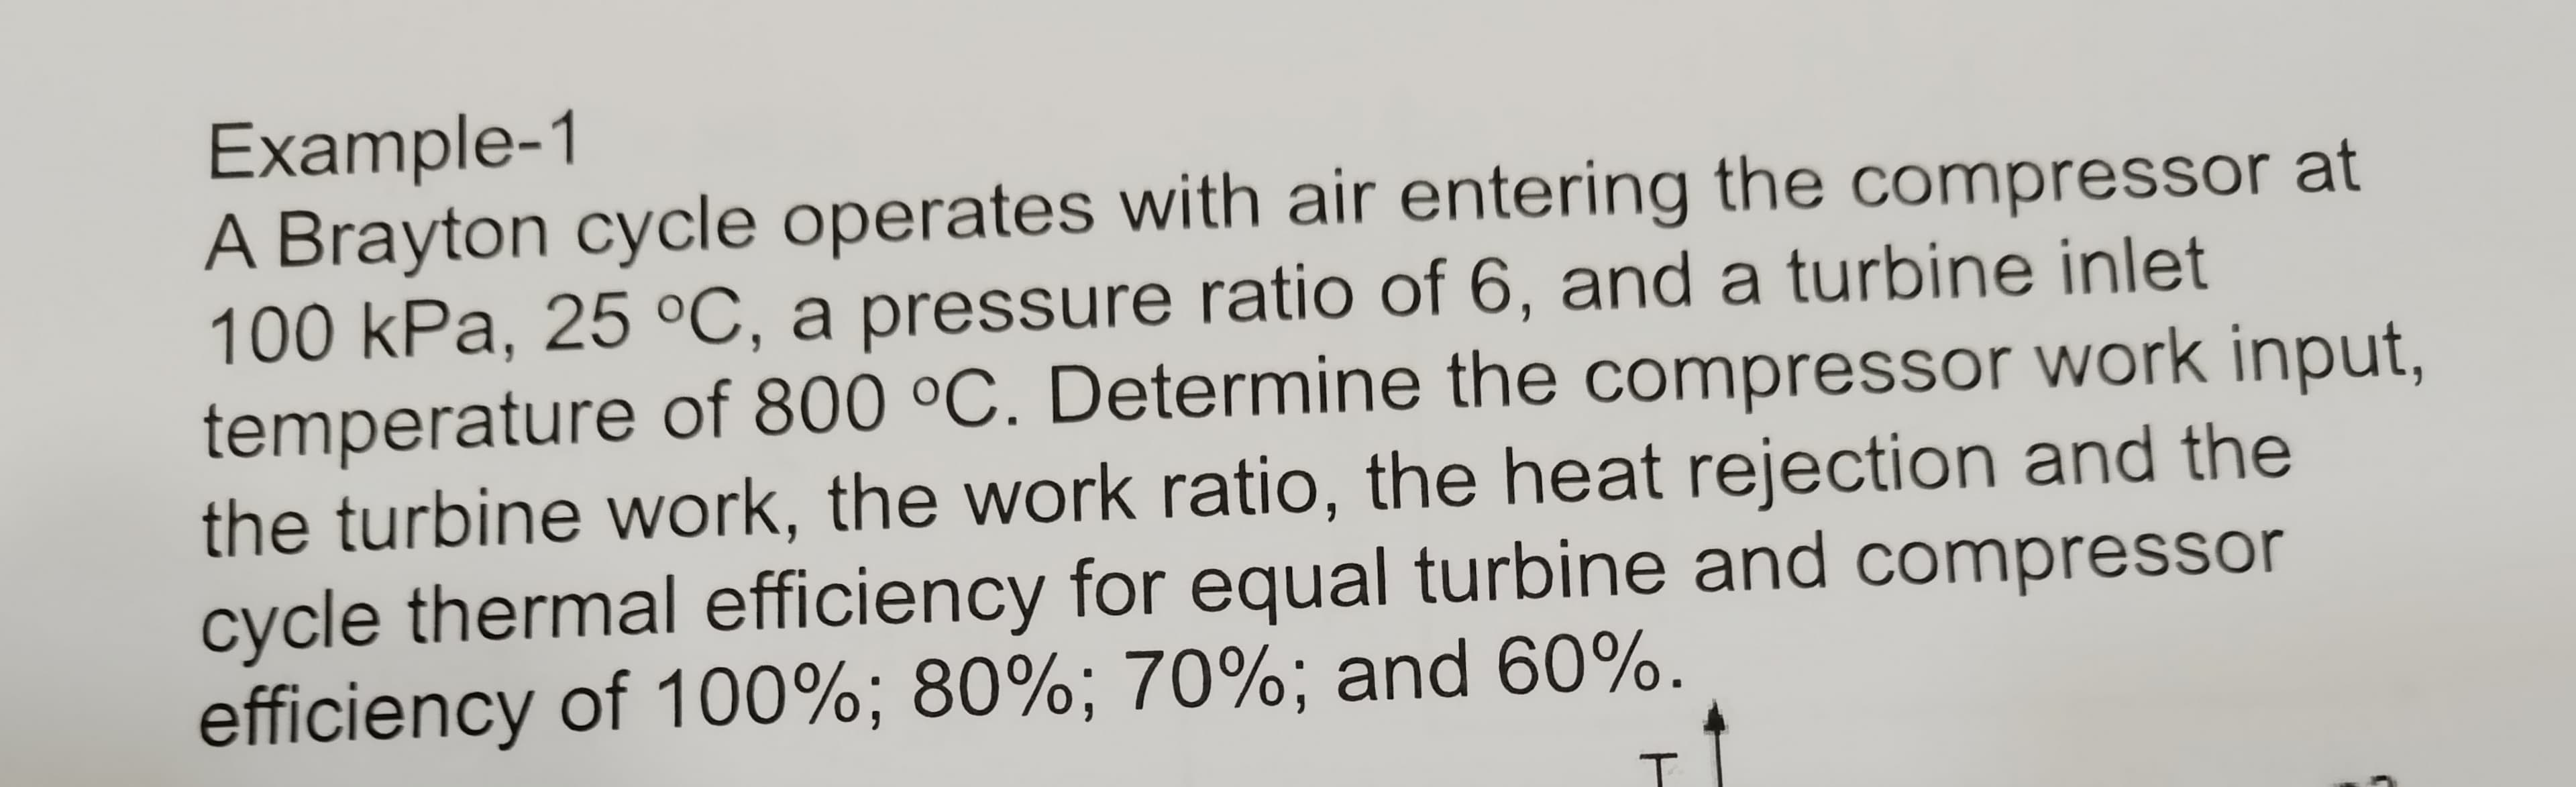 Example-1
A Brayton cycle operates with air entering the compressor at
100 kPa, 25 °C, a pressure ratio of 6, and a turbine inlet
temperature of 800 °C. Determine the compressor work input,
the turbine work, the work ratio, the heat rejection and the
cycle thermal efficiency for equal turbine and compressor
efficiency of 100%; 80%; 70%; and 60%.
T